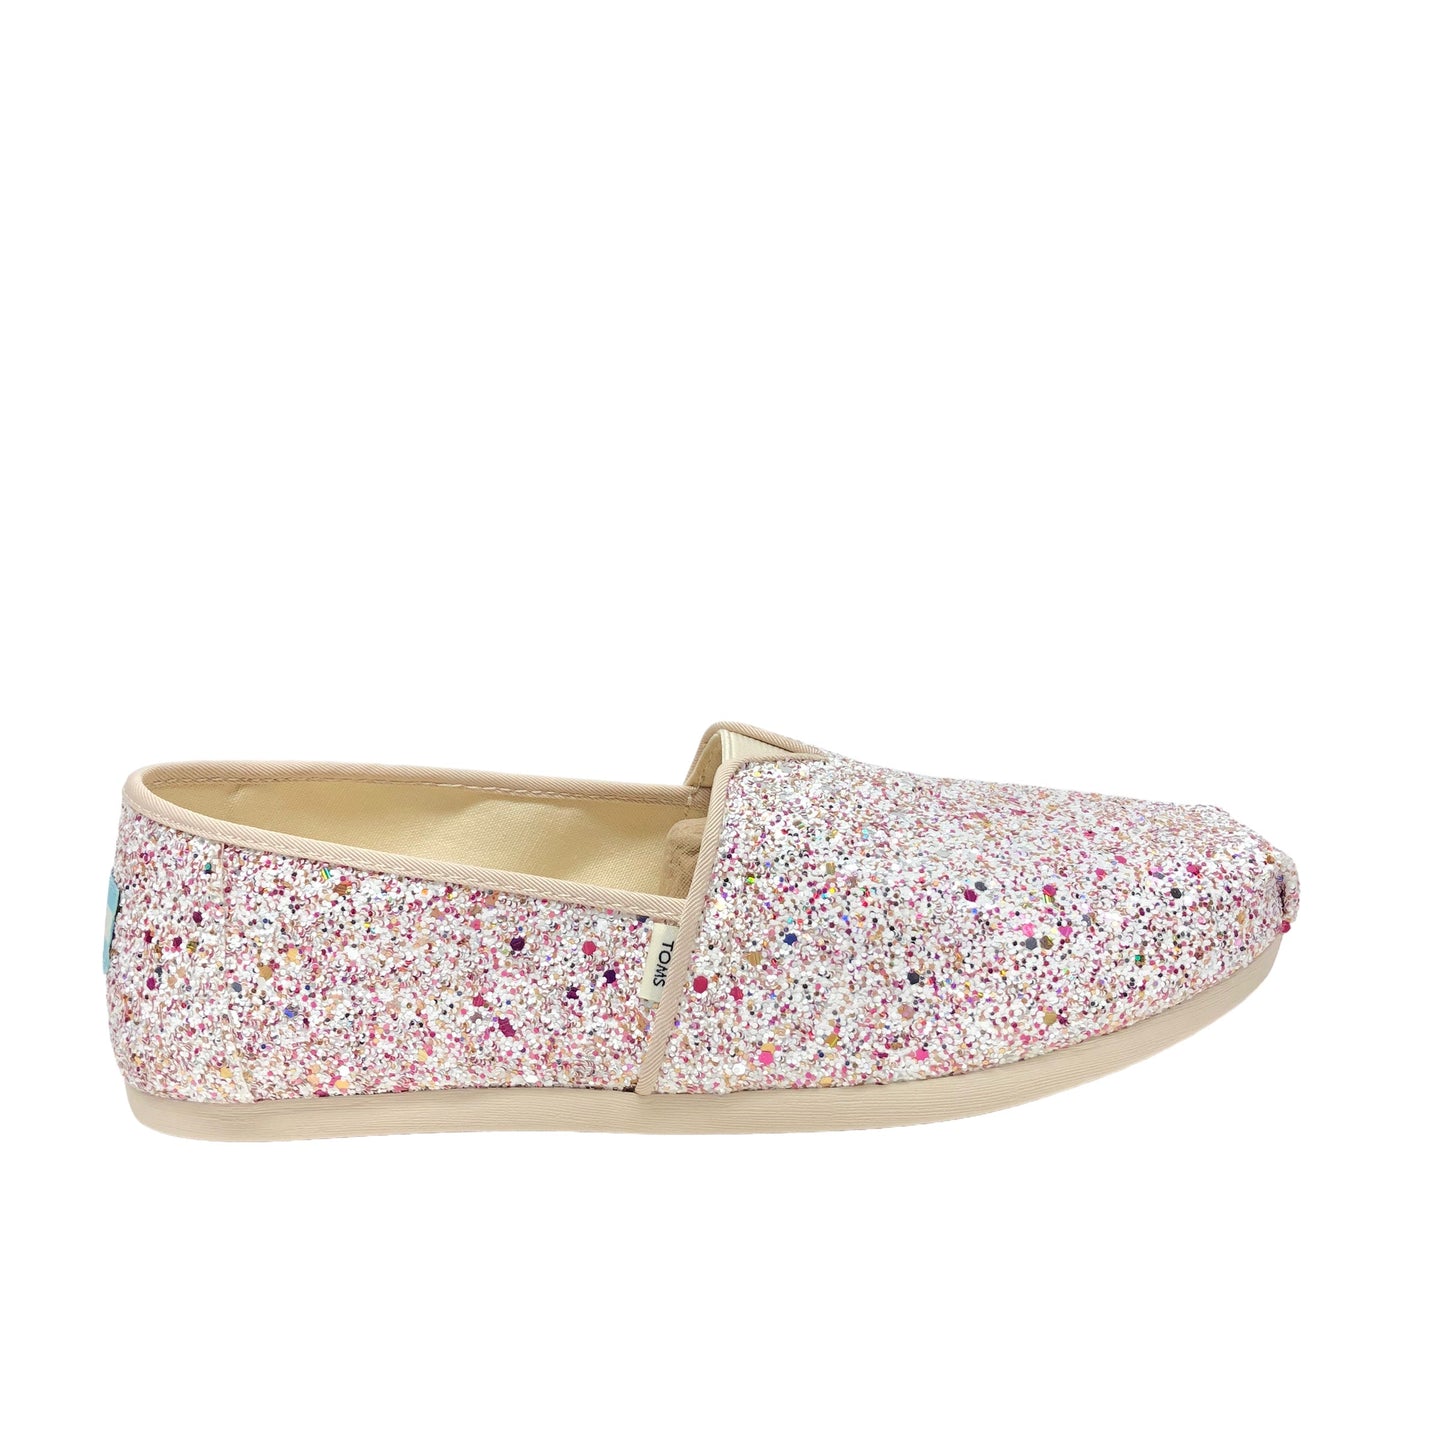 Pink & White Shoes Sneakers Toms, Size 8.5